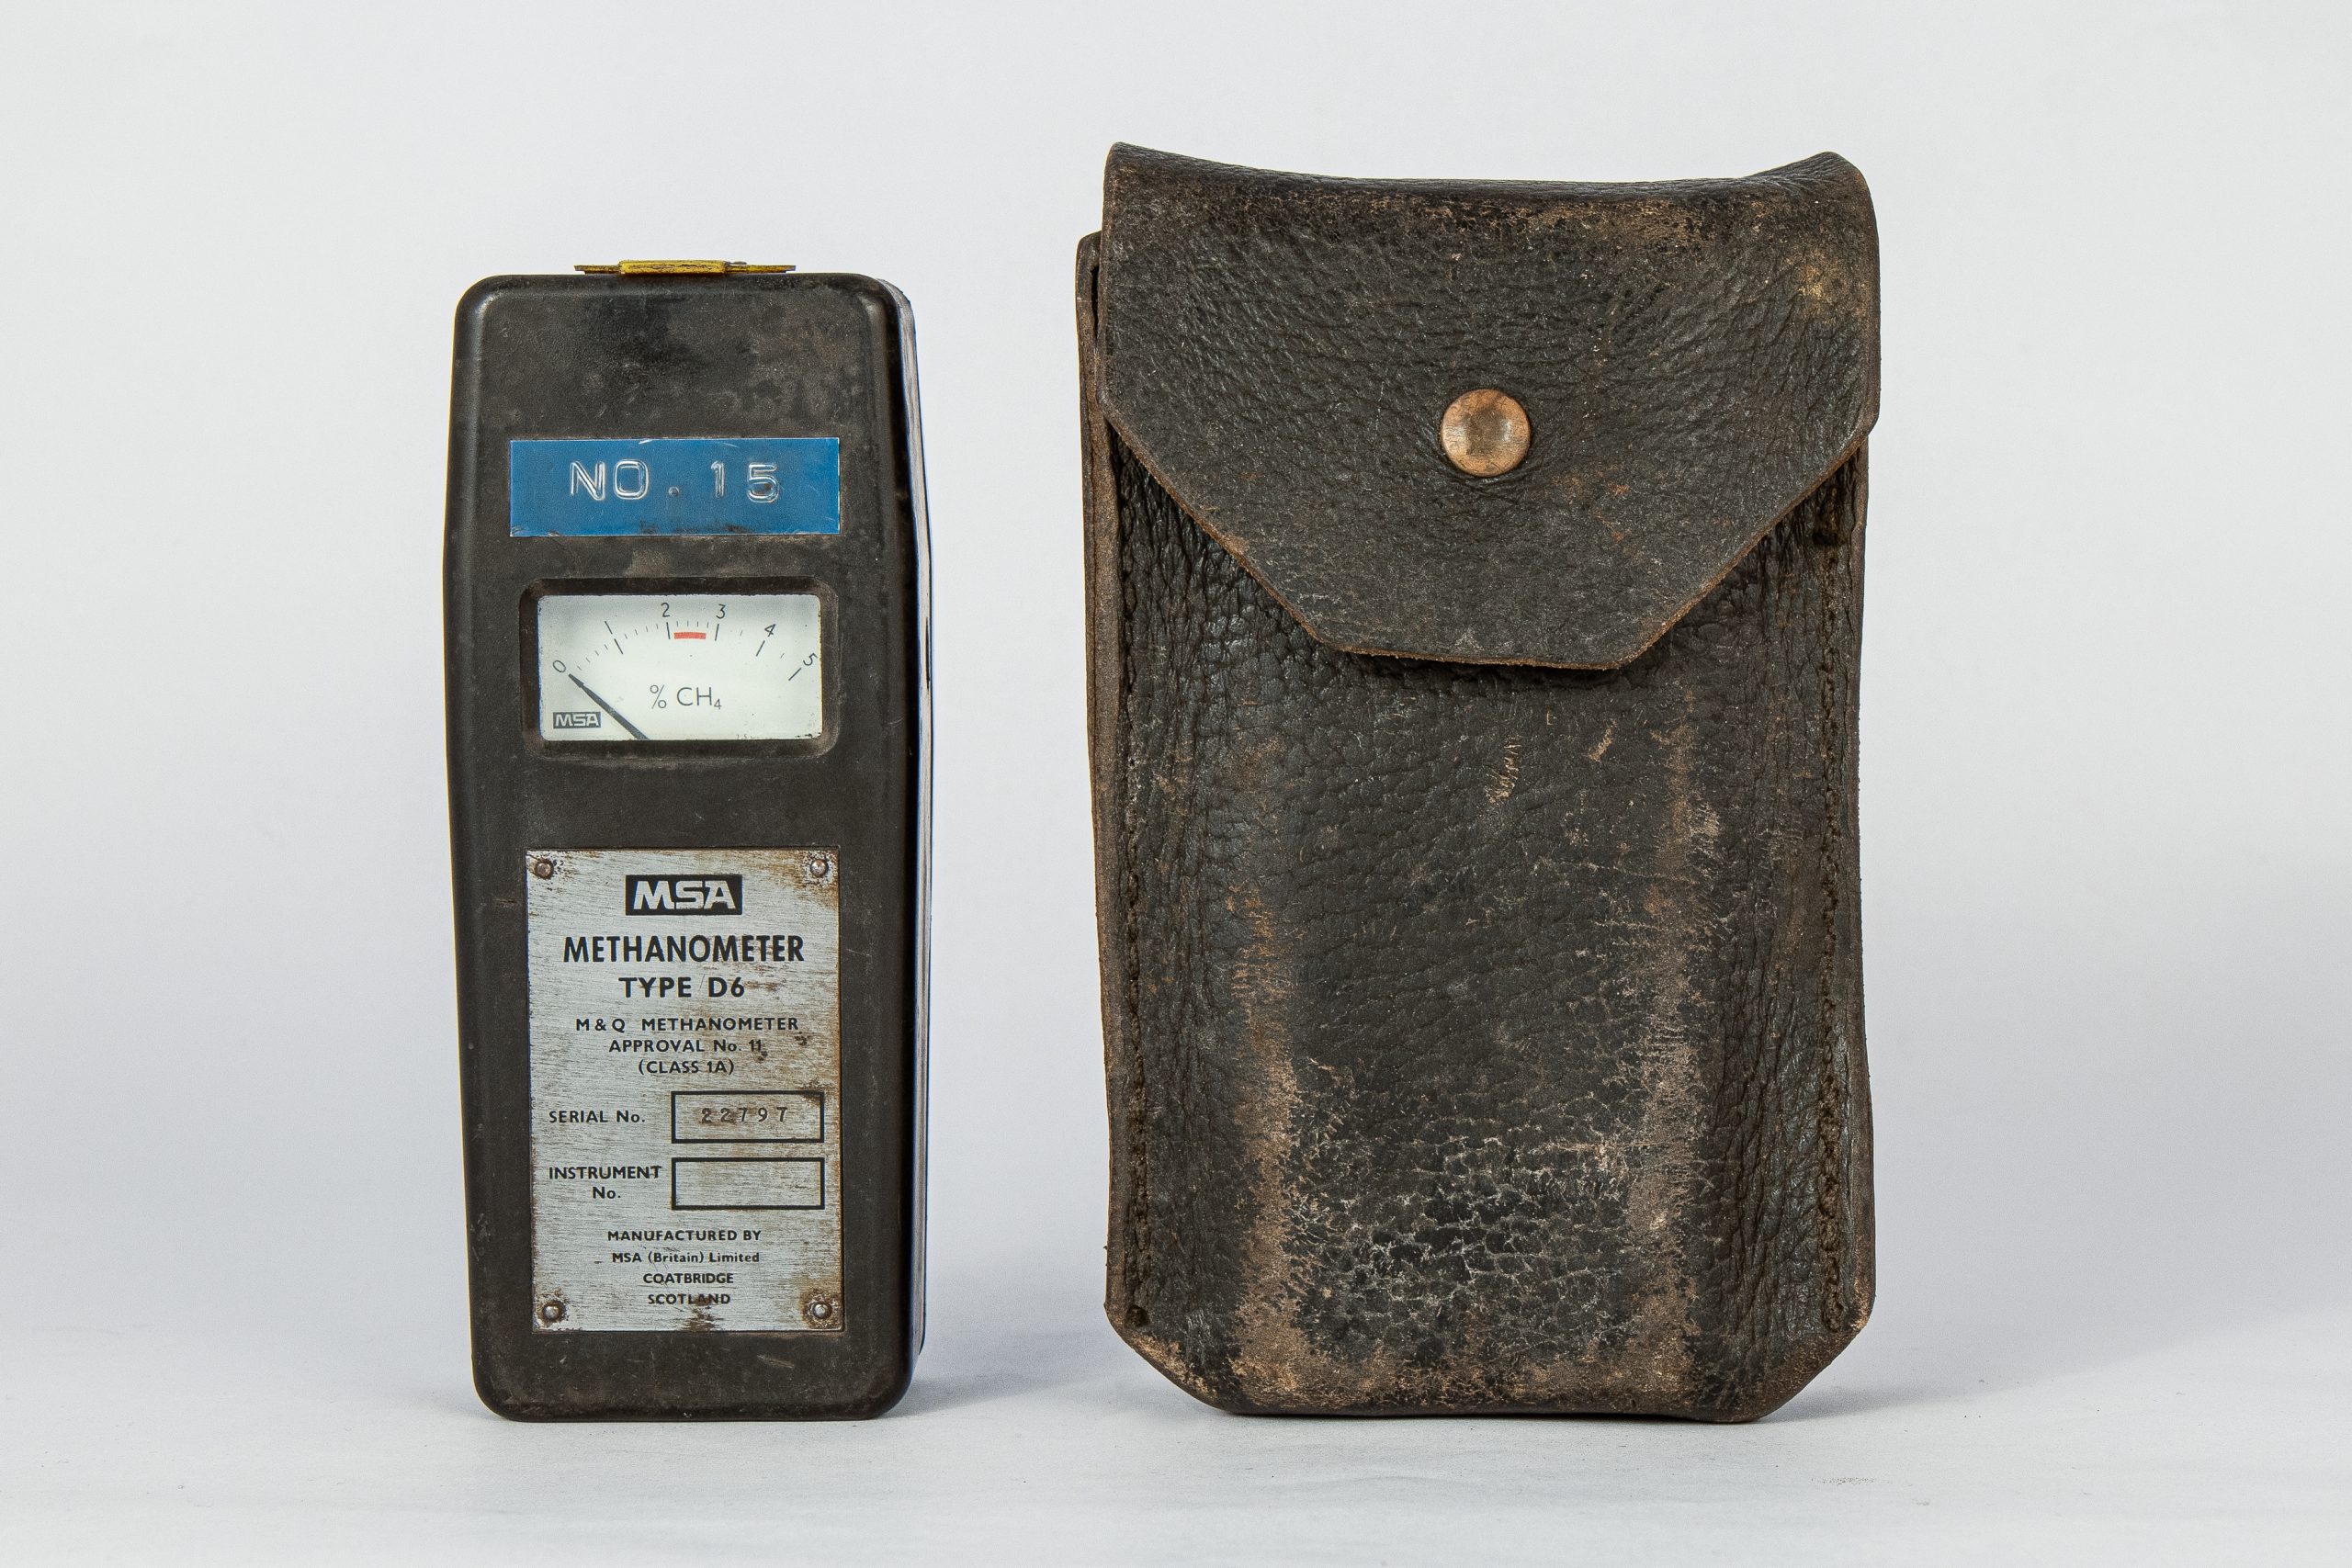 Device shaped like an old Nokia mobile phone. It has no buttons on the face but a gauge from 0-5% CH4. Panel screwed to the front reads: "MSA METHANOMETER TYPE D6. M&Q METHANOMETER APPROVAL No. 11 (CLASS 1A) SERIAL NO. 22797 MANUFACTURED BY MSA (Britain) Limited COATBRIDGE SCOTLAND." Beside it is a leather pouch to hold the device.